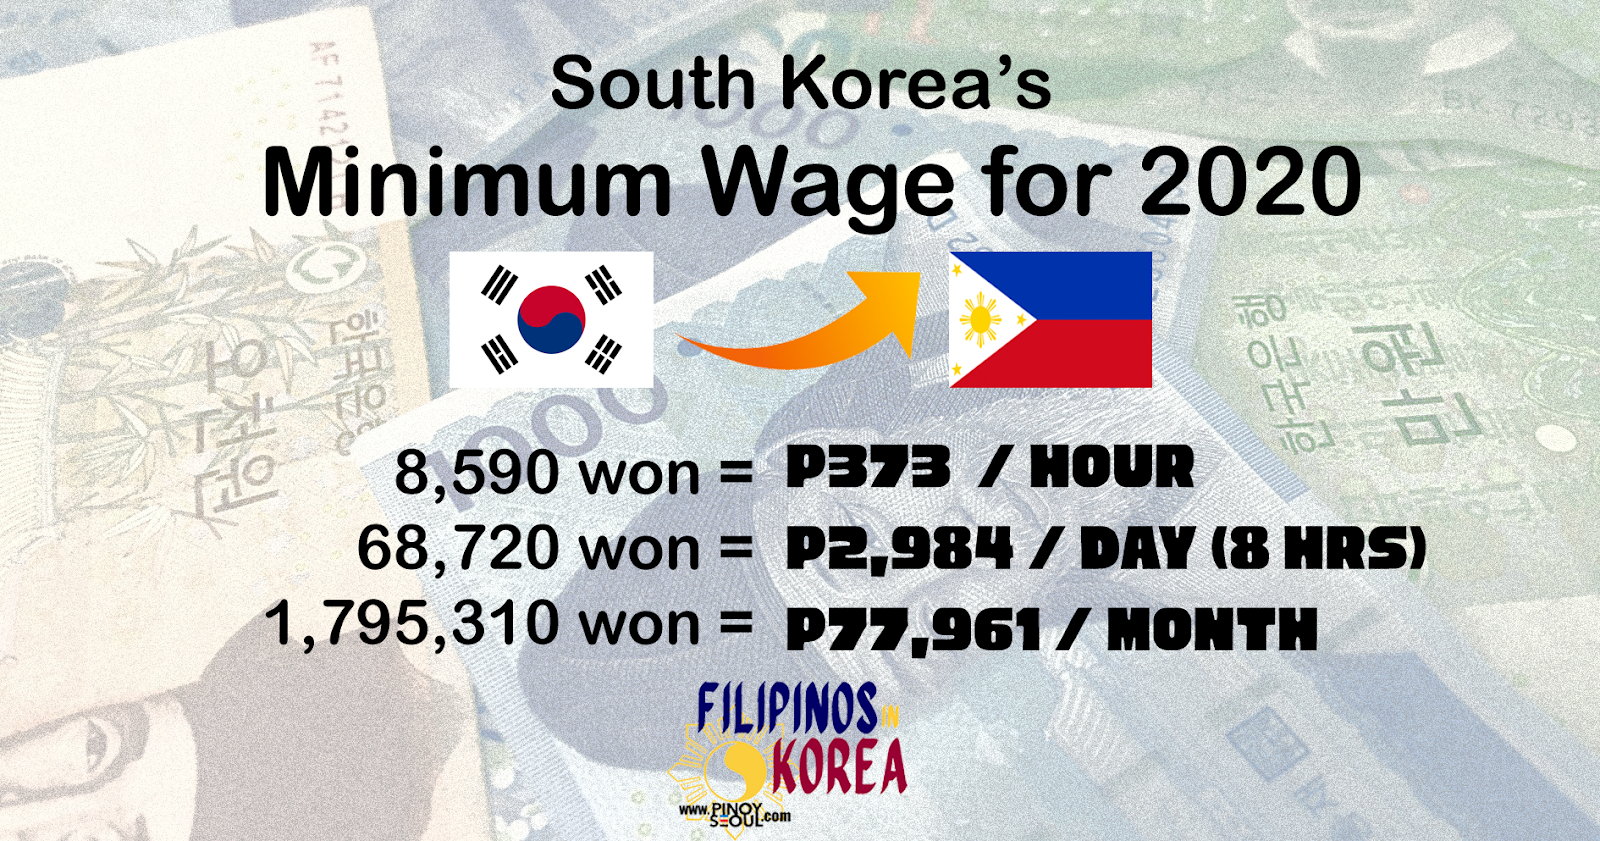 2020 Minimum Wage in Korea for Filipino EPS Workers is ...